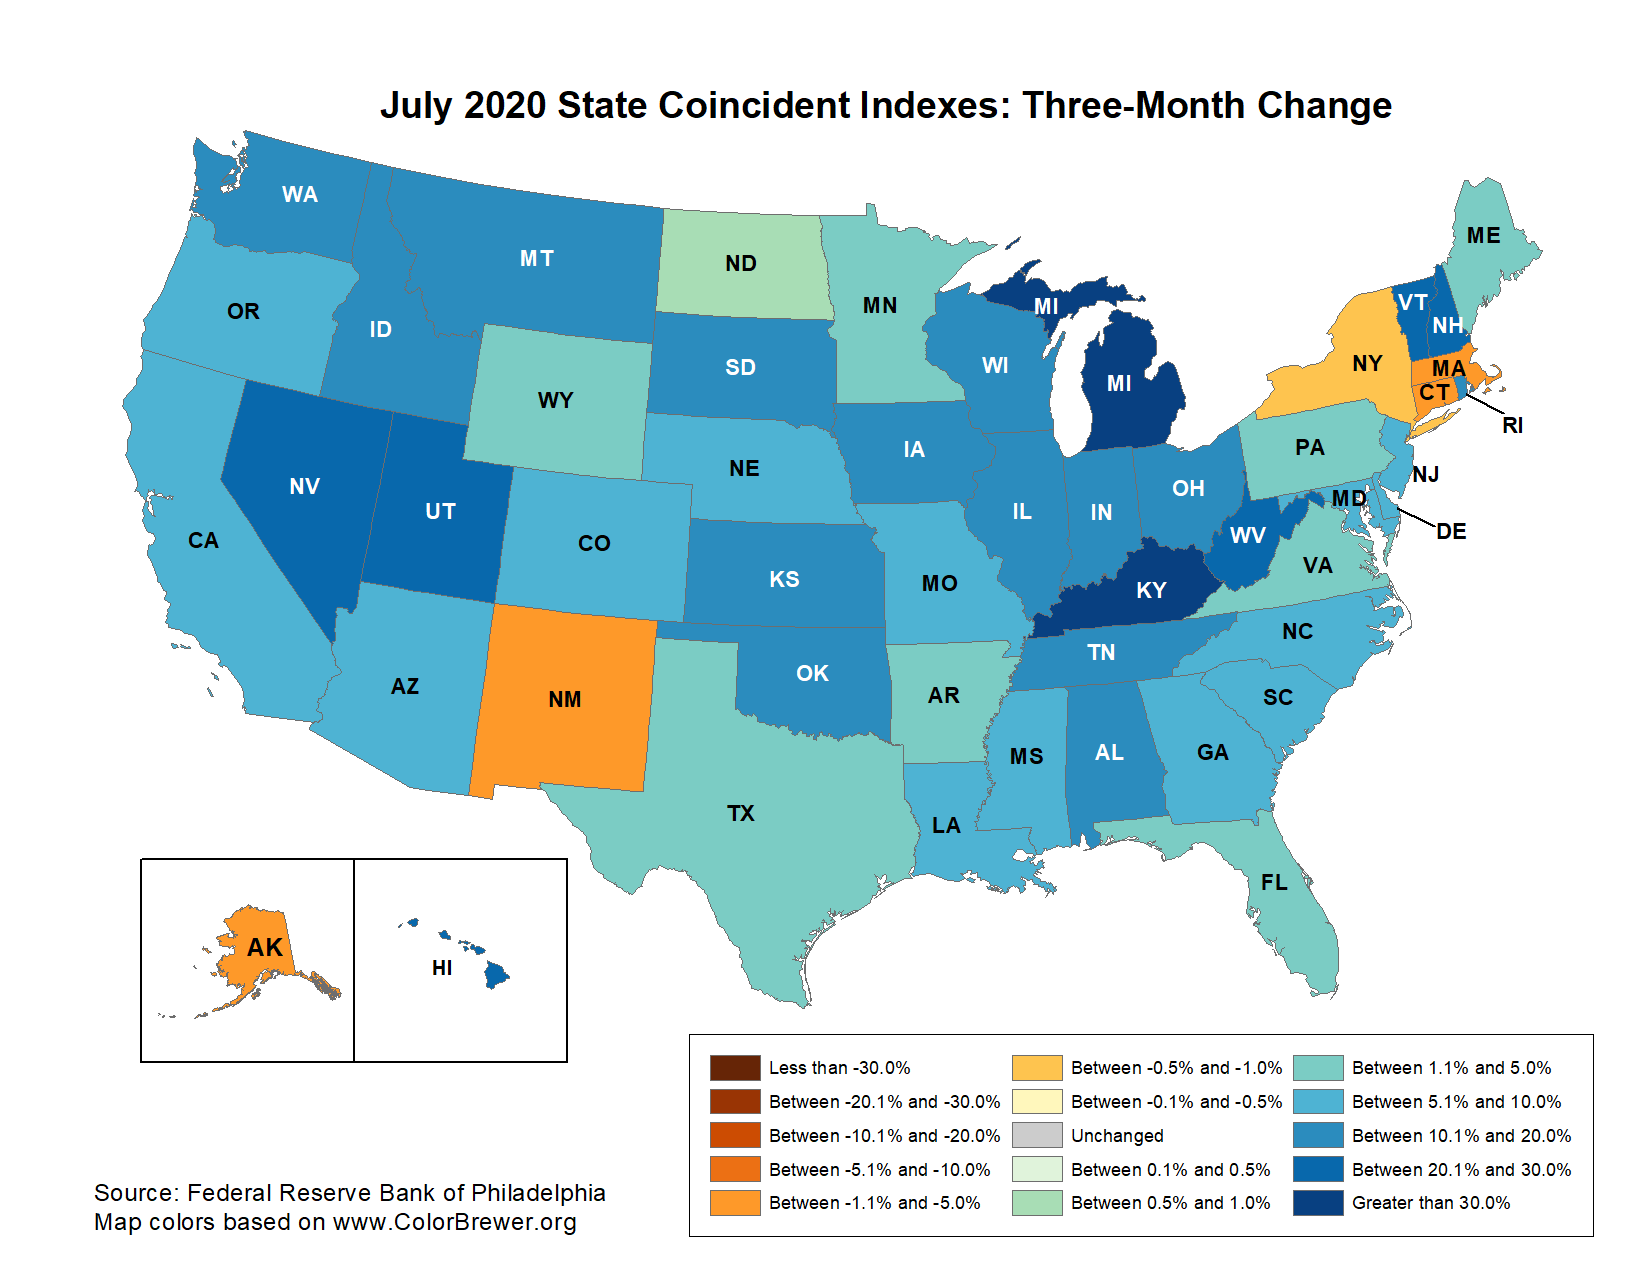 Map of the U.S. showing the State Coincident Indexes Three-Month Change in July 2020